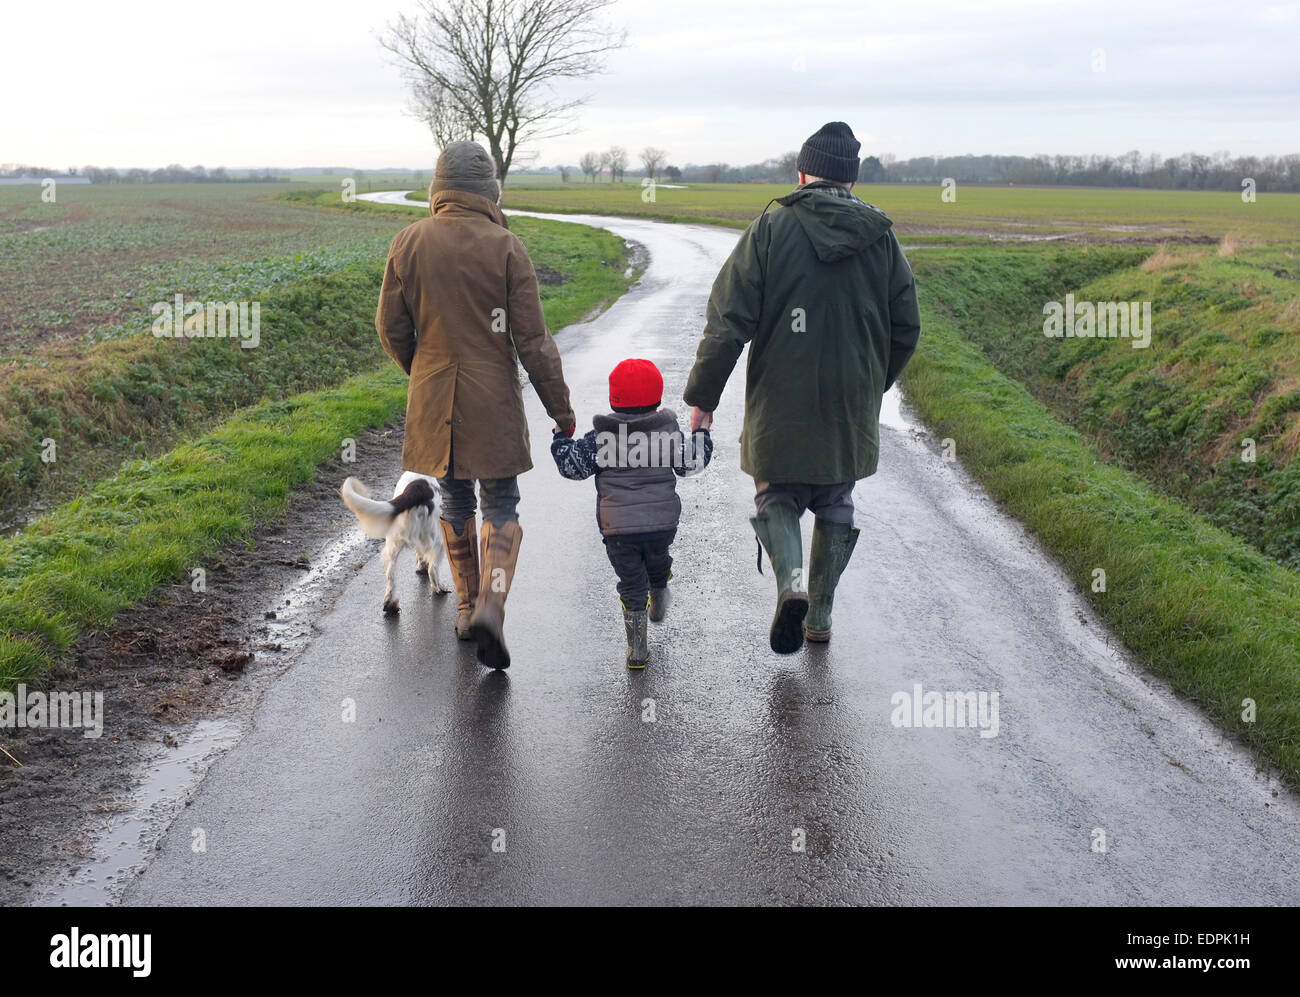 three generations - grandparent, parent and child - walking with dog holding hands back view Stock Photo